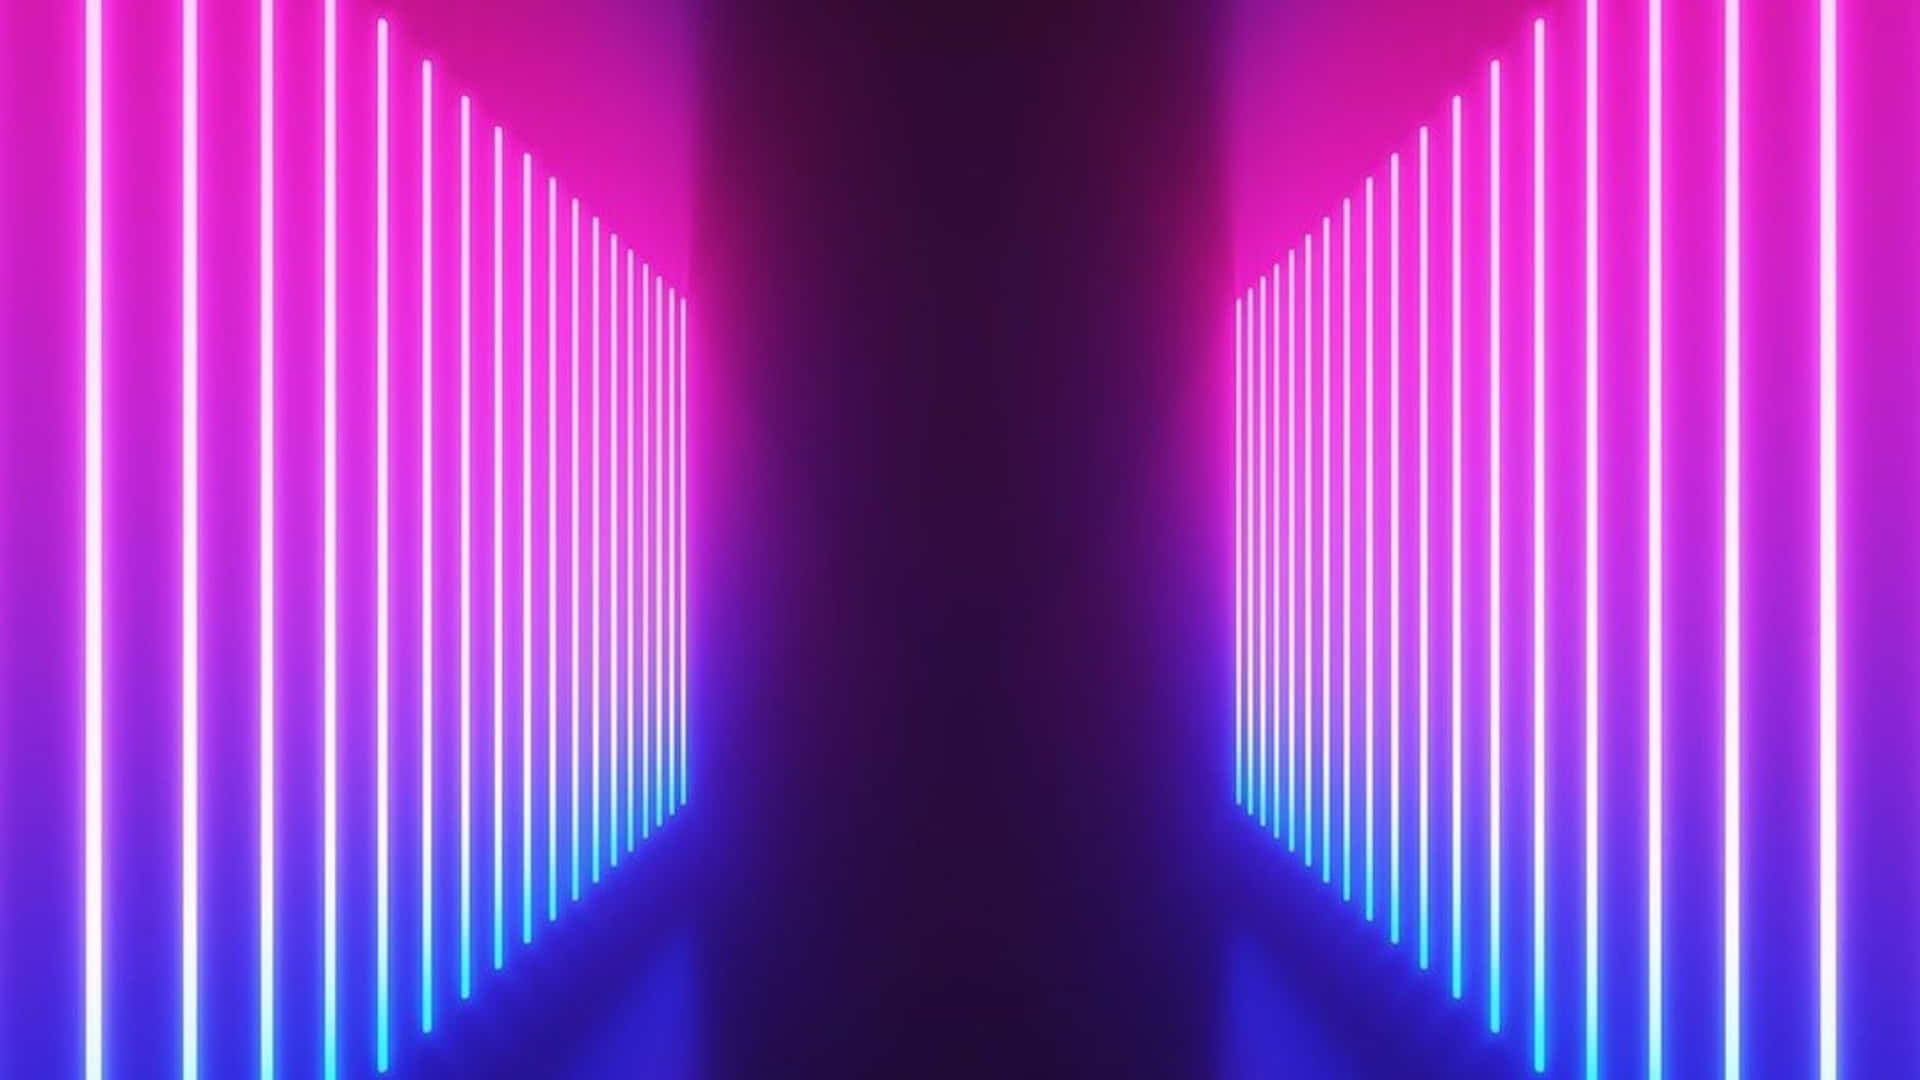 Neon Light Tunnel With Blue And Pink Neon Lights